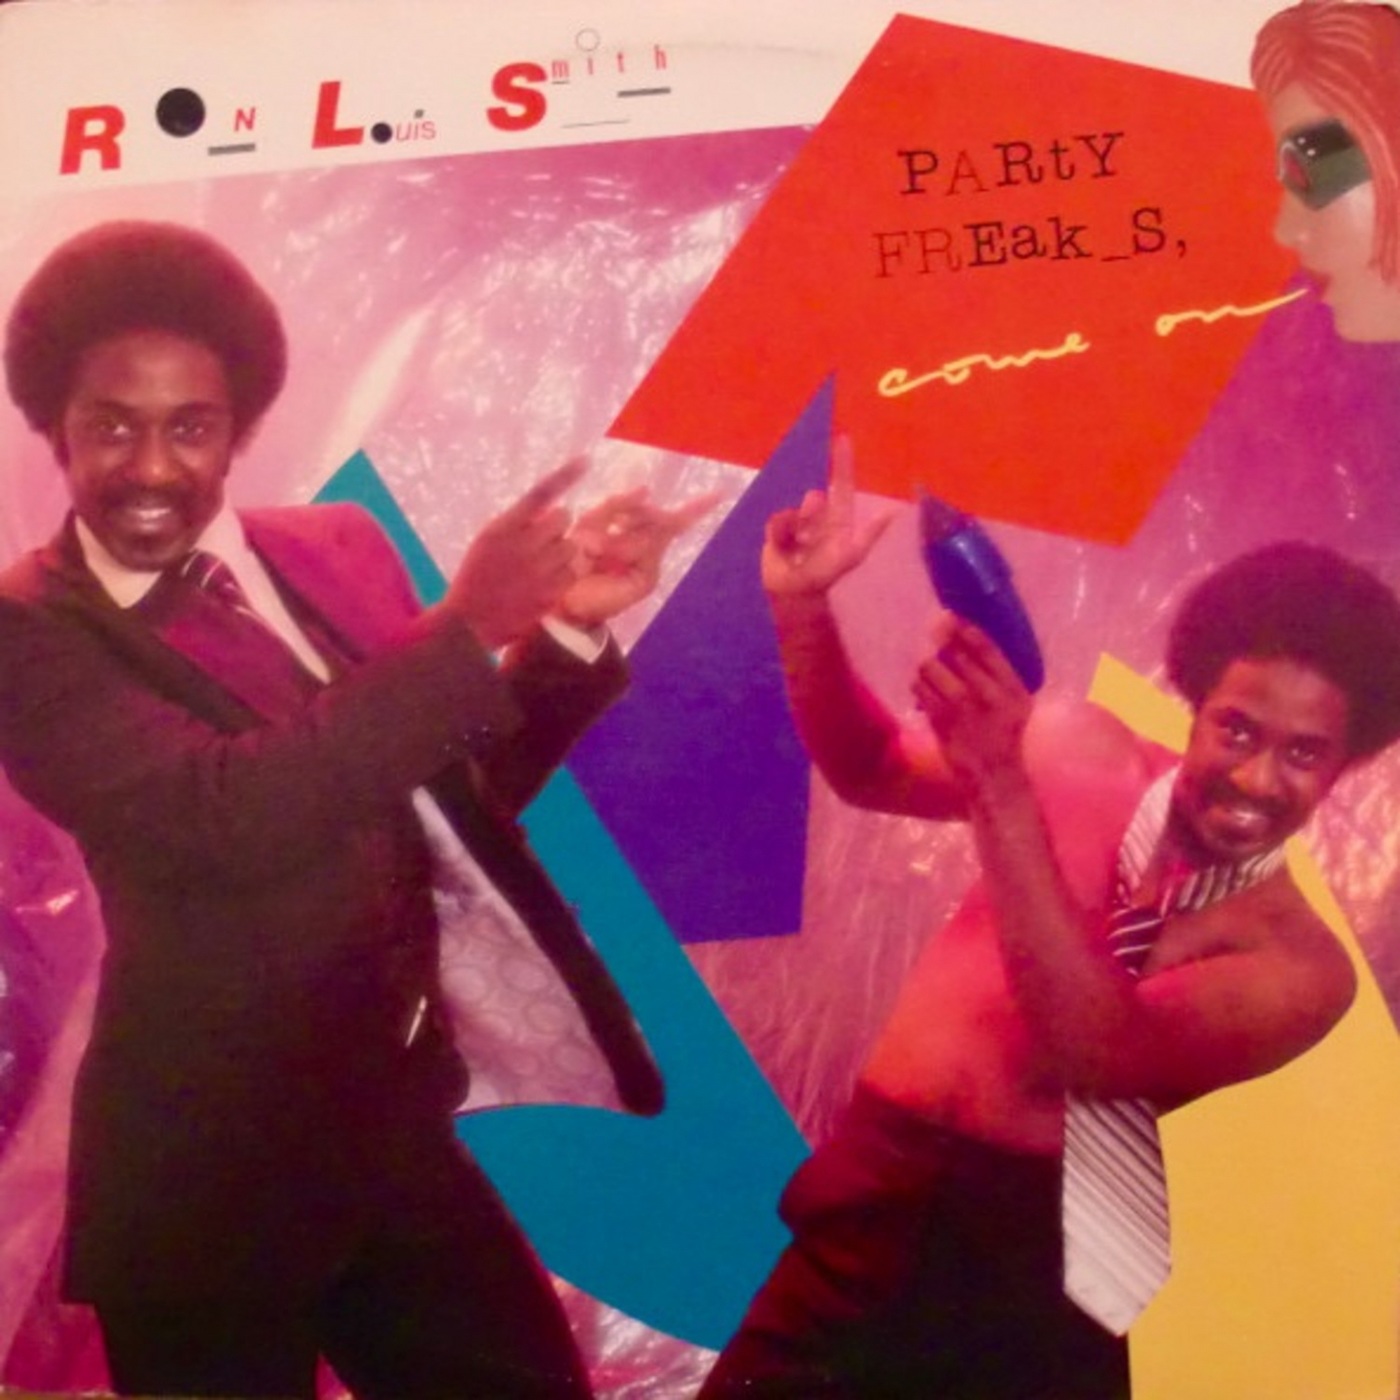 Ron Louis Smith - Party Freaks, Come on 1978 Remaster / Sunpire Records